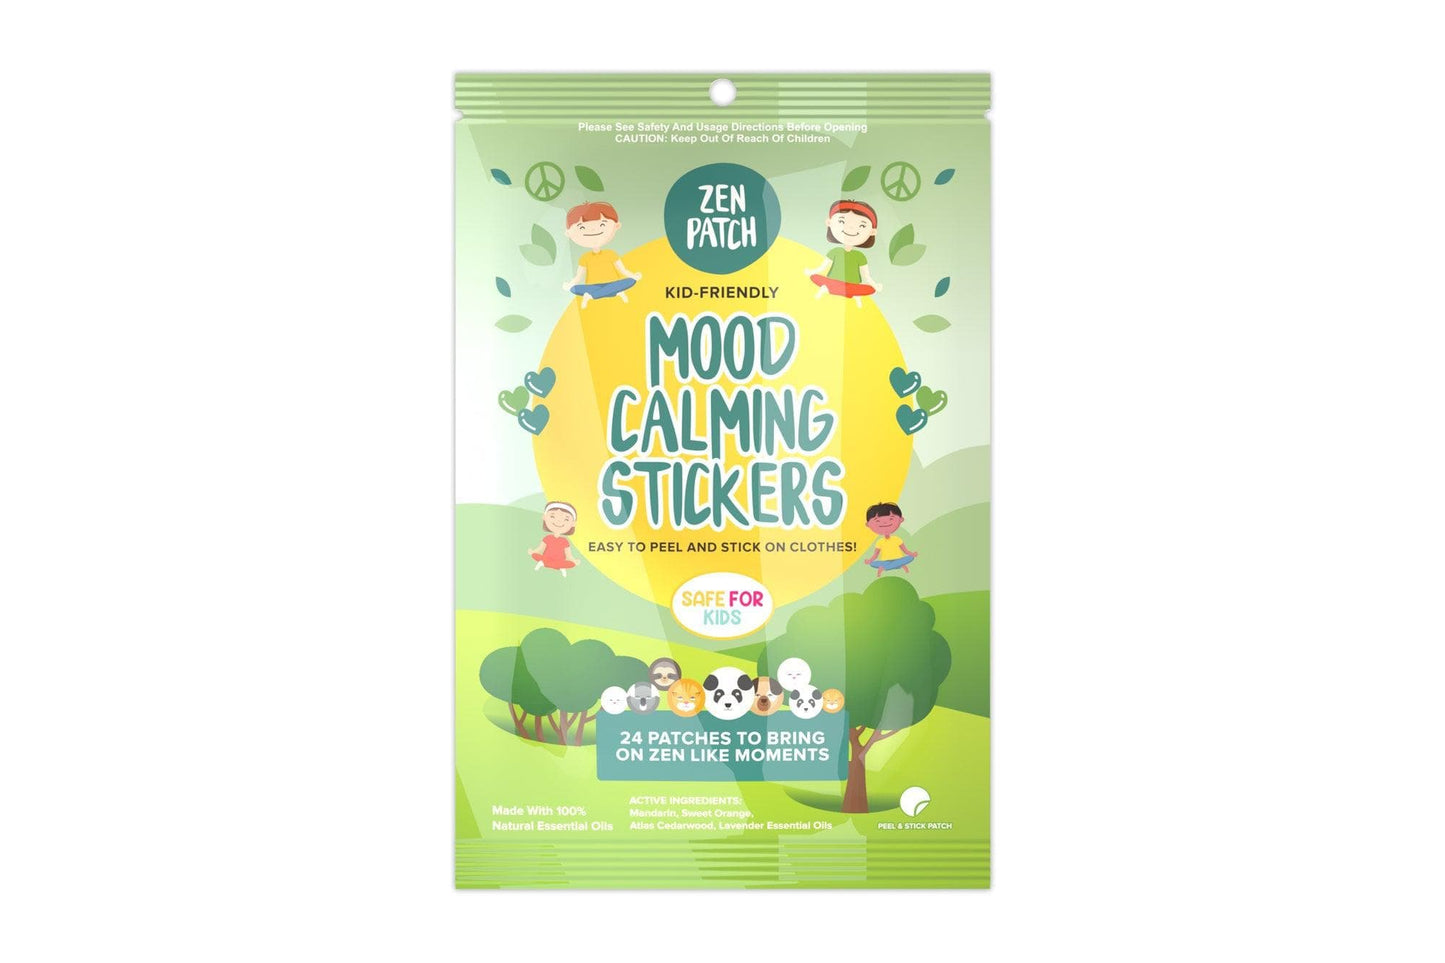 30 x ZenPatch Mood Calming Stickers individual resale packets in a Retail Display Box*